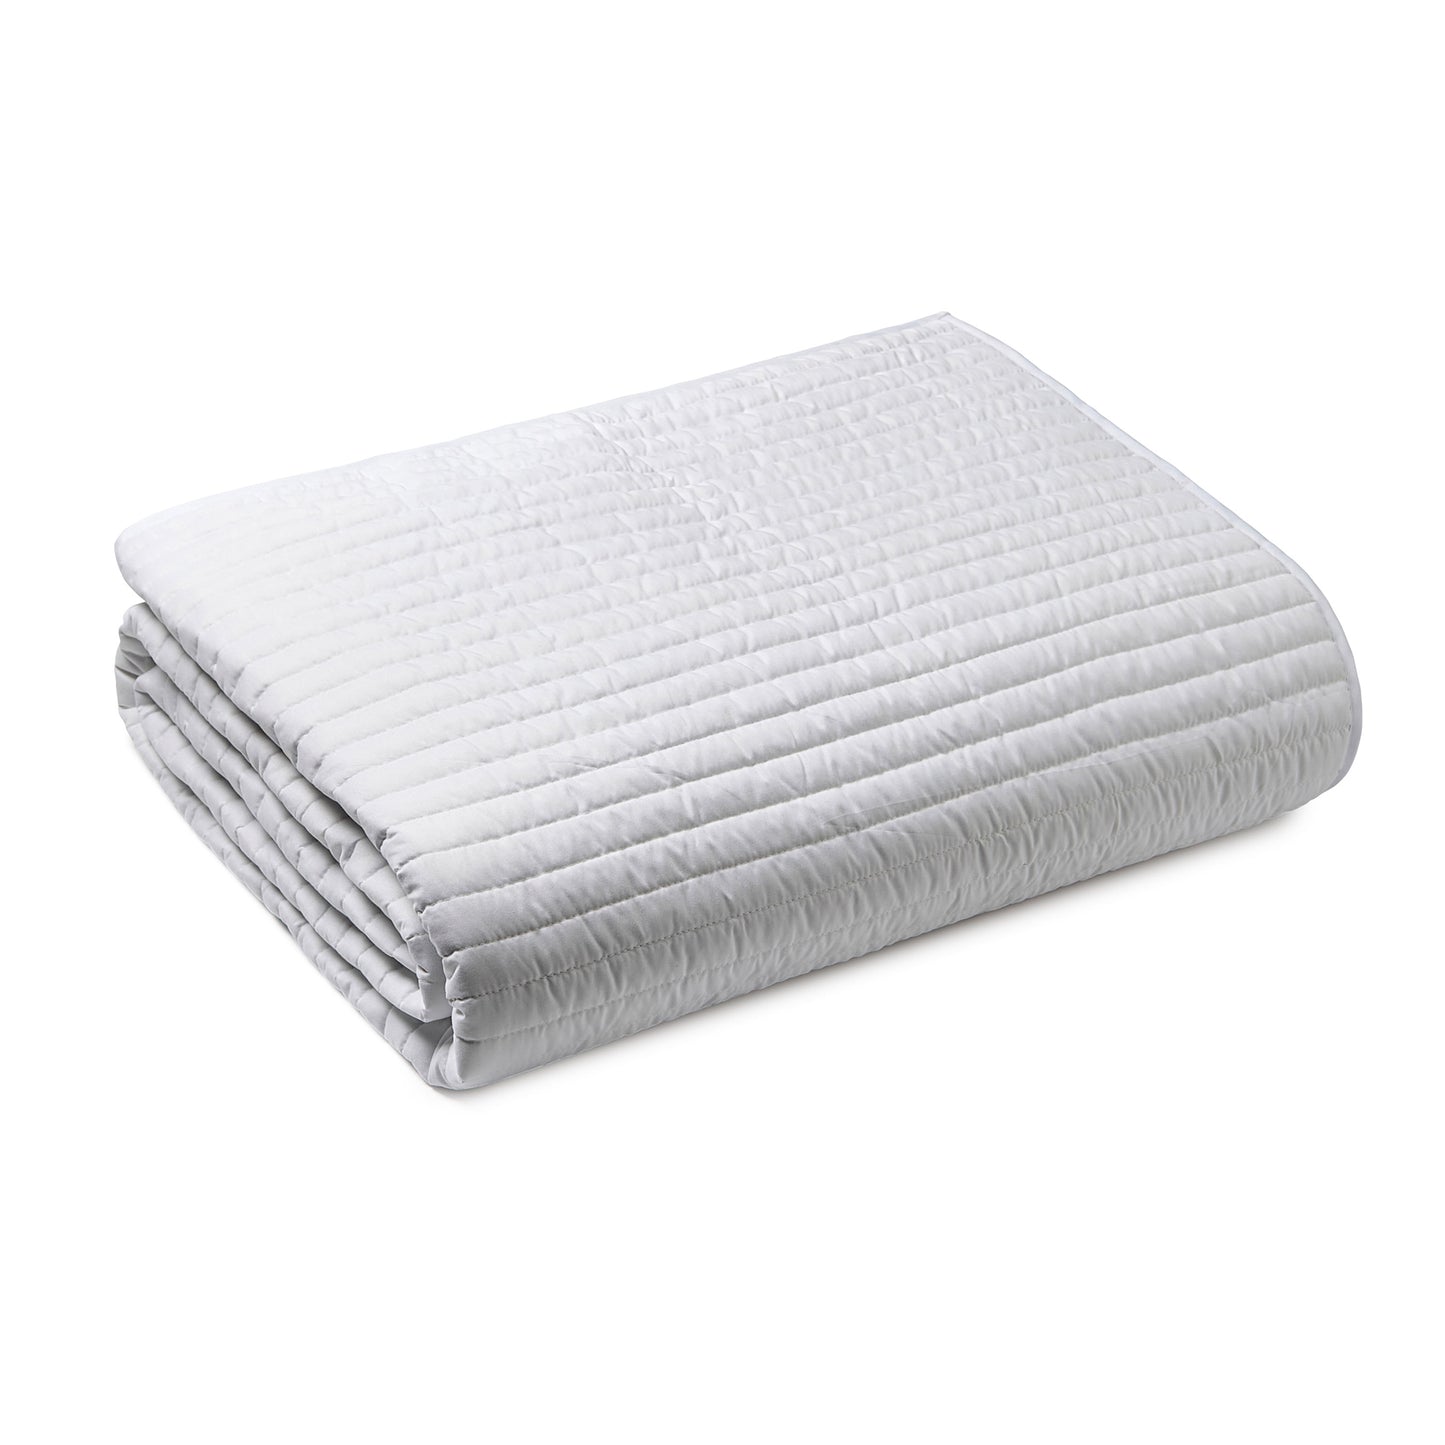 Bianca White Quilted Lines Bedspread (220cm x 230cm)